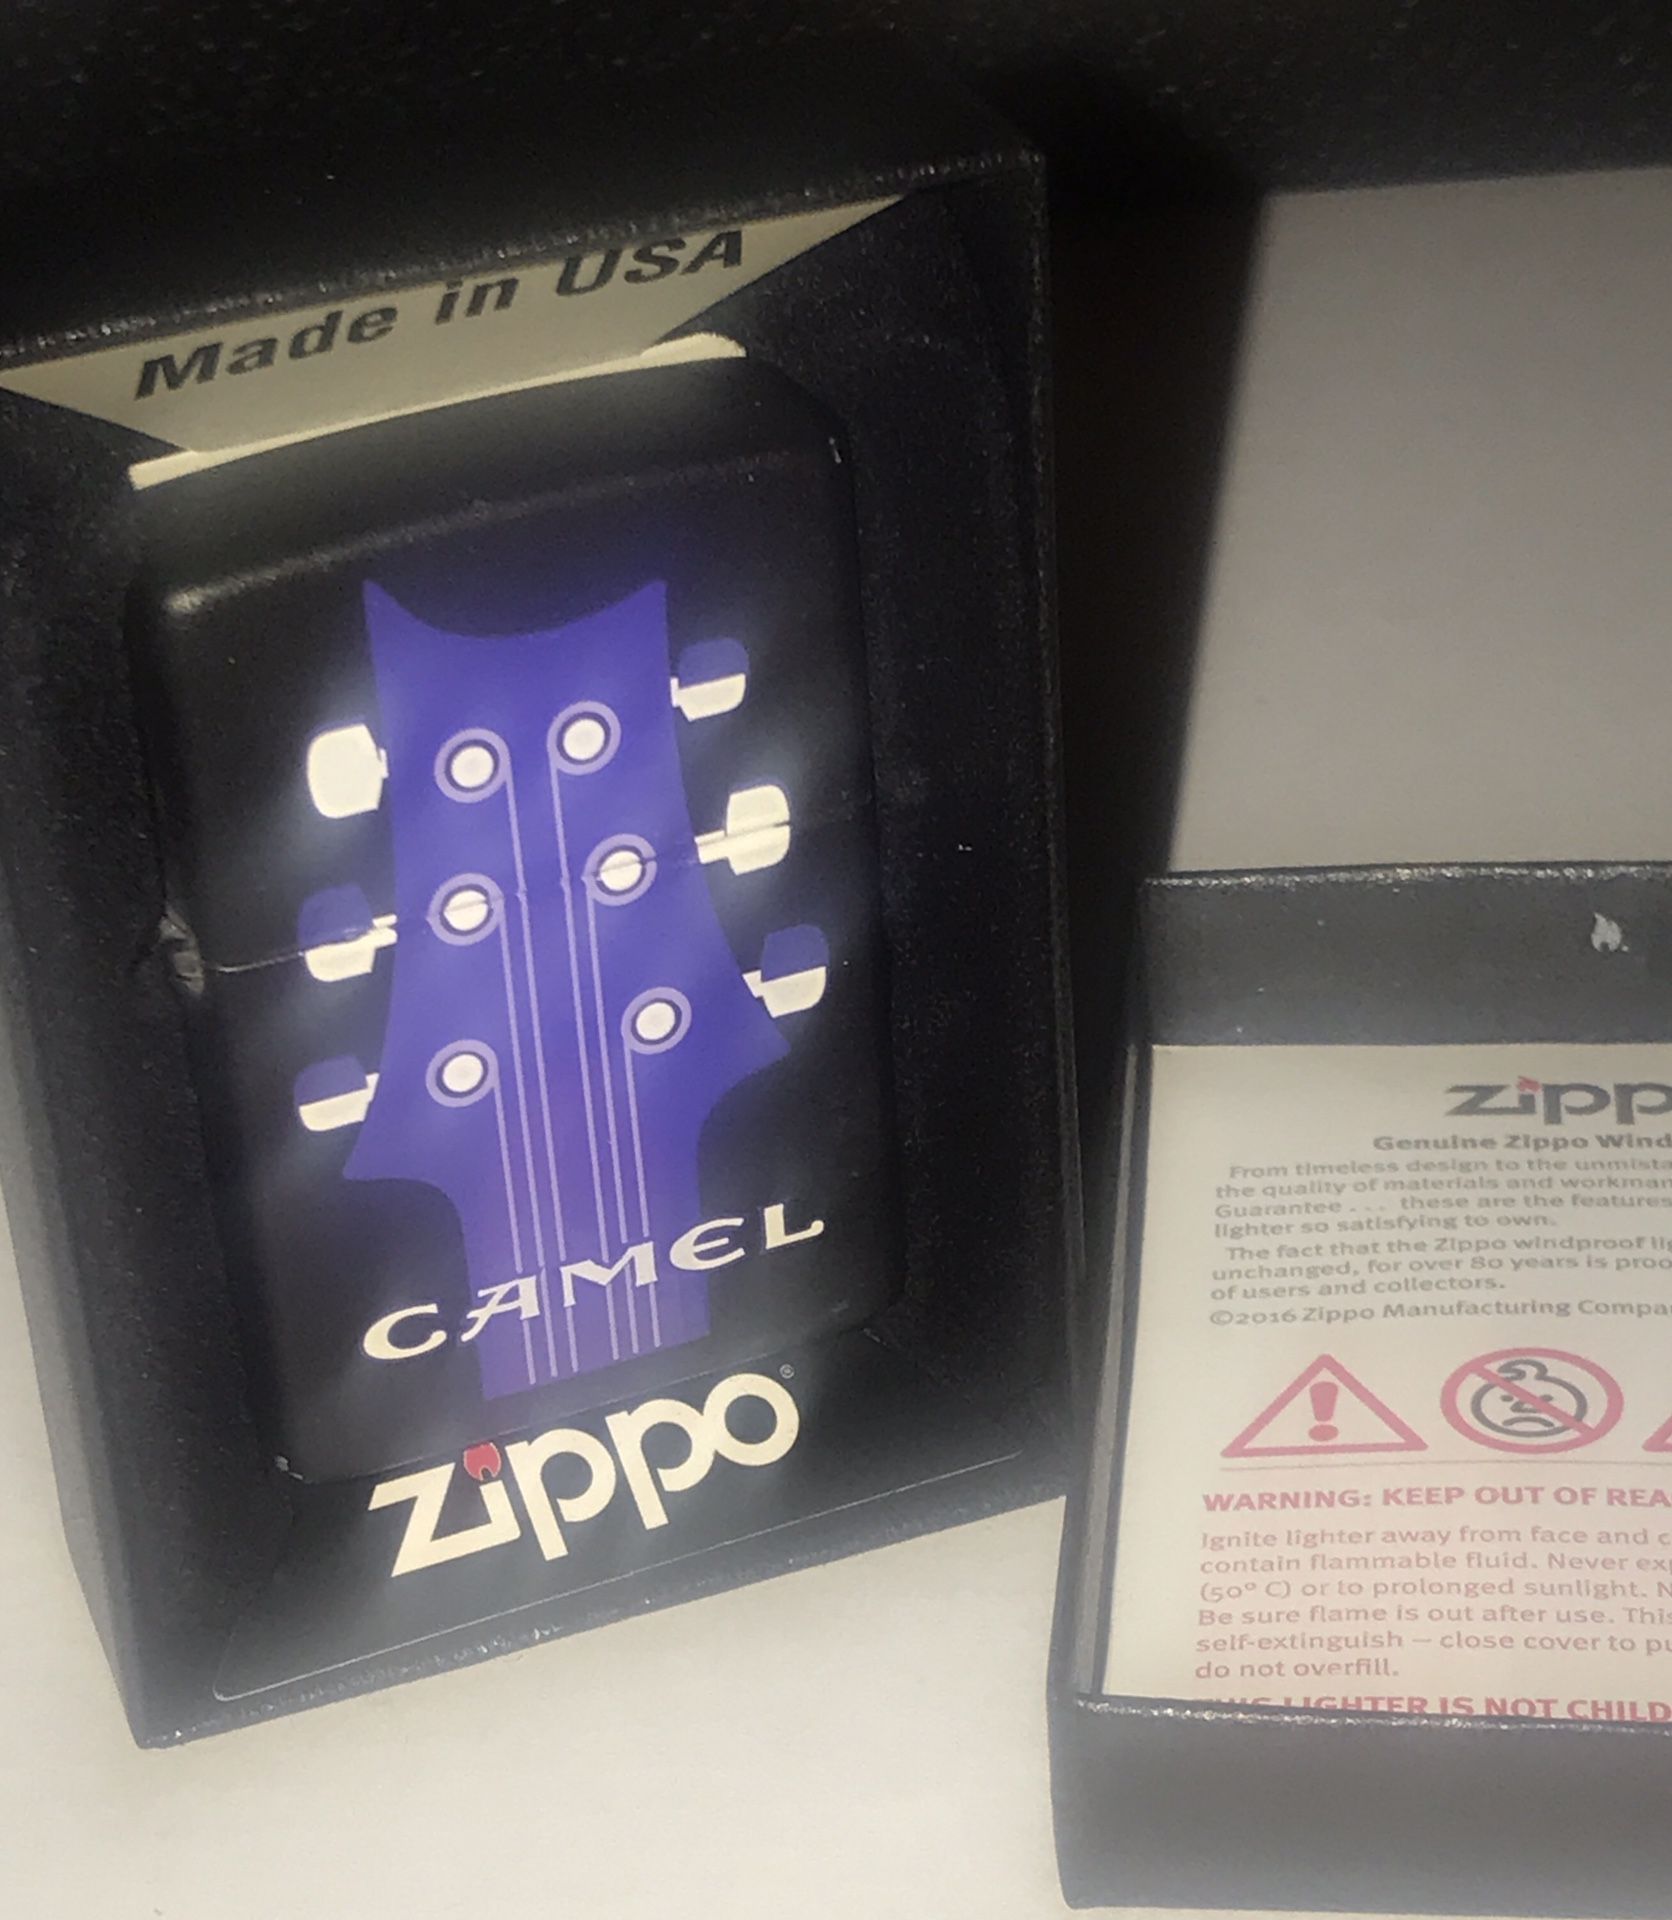 Vintage Zippo Lighter C-Xll March 1996 Camel Purple Six String Guitar Treble Clef on back side New In Box